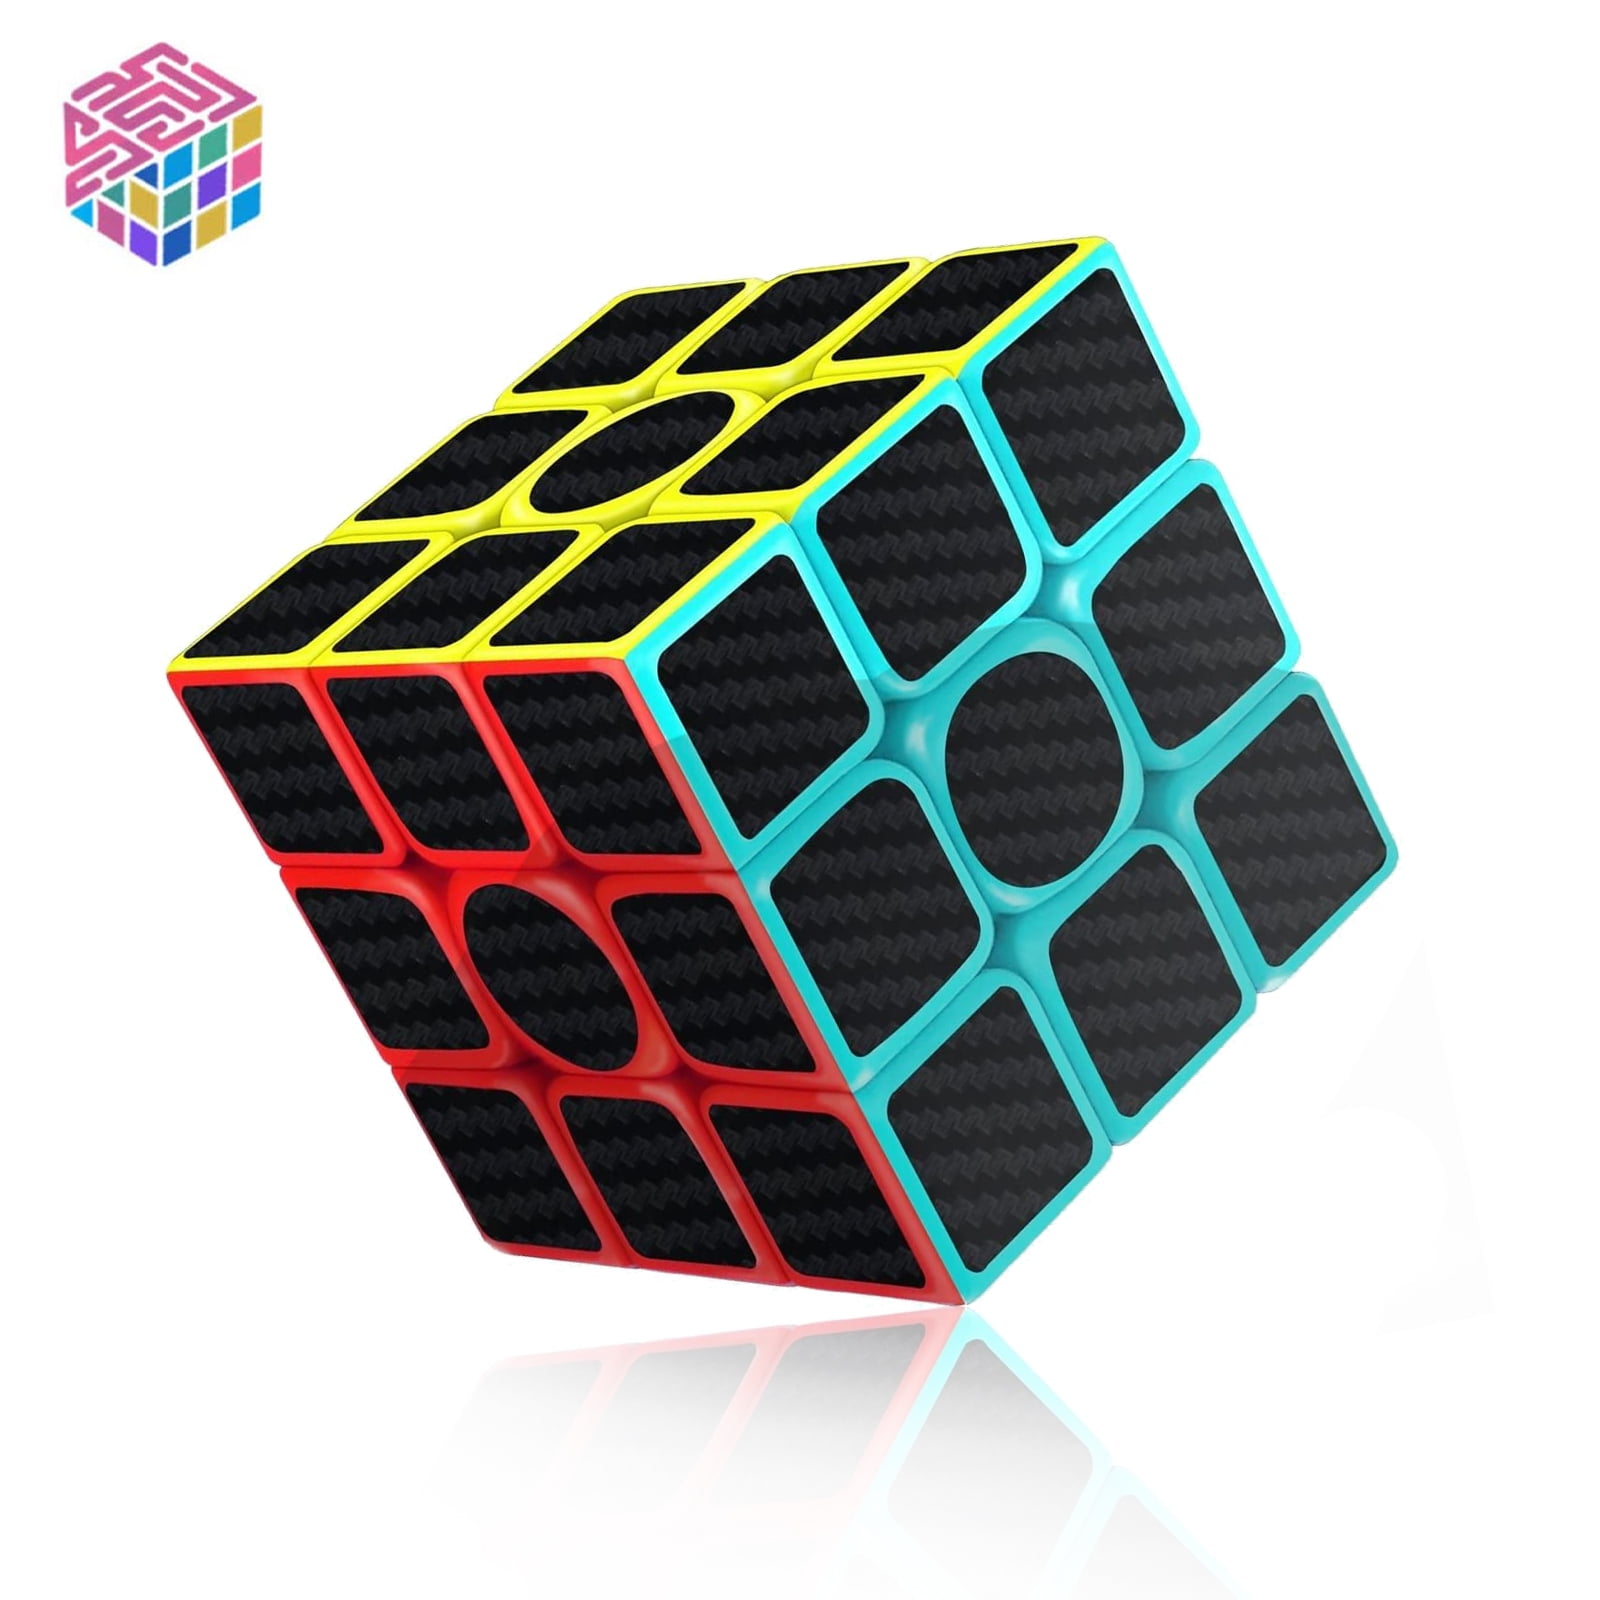 Speed Cube 3x3x3 Cube Toy for Kids, Classic Magic Cube Puzzle Toy Full Size  56mm/2.2In, Smooth & Durable Puzzle Cube Toy Magic Square Puzzle Cube 